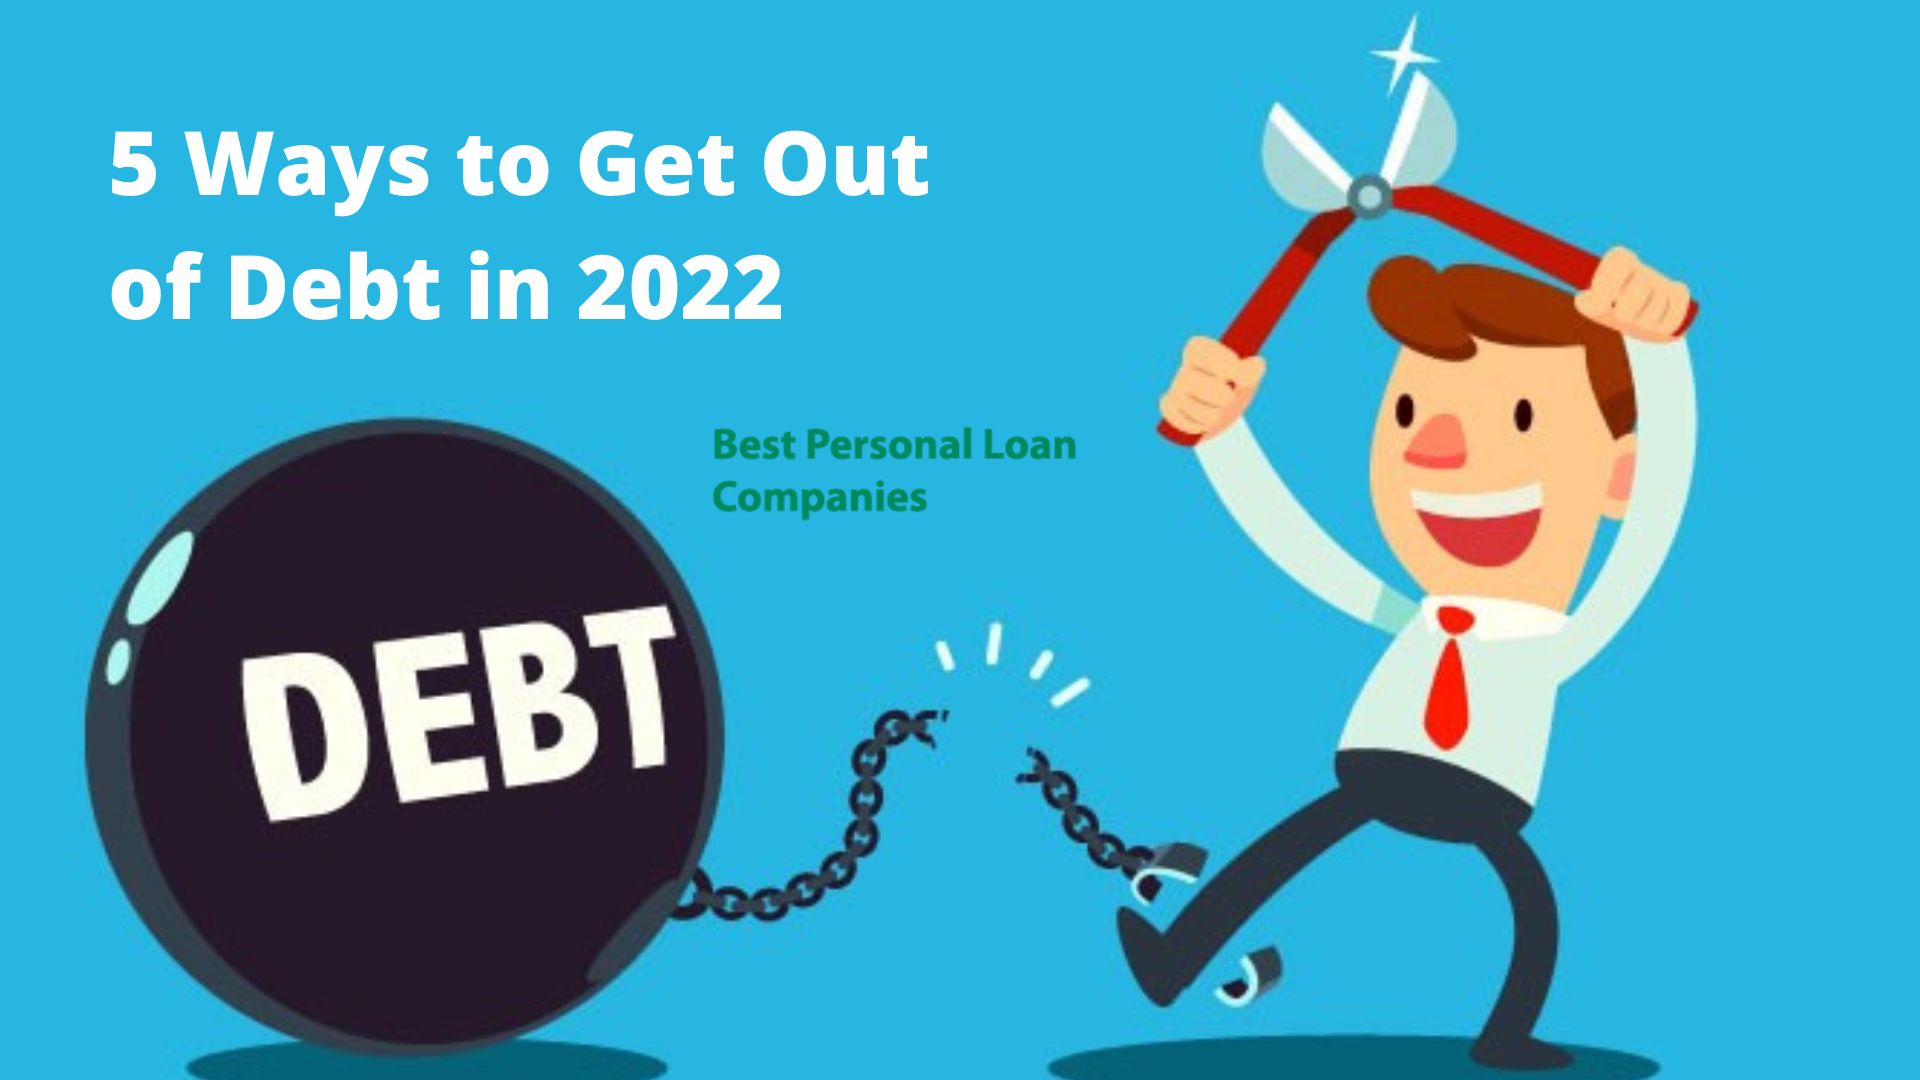 5 Perfect Ways to Get Out of Debt in 2022